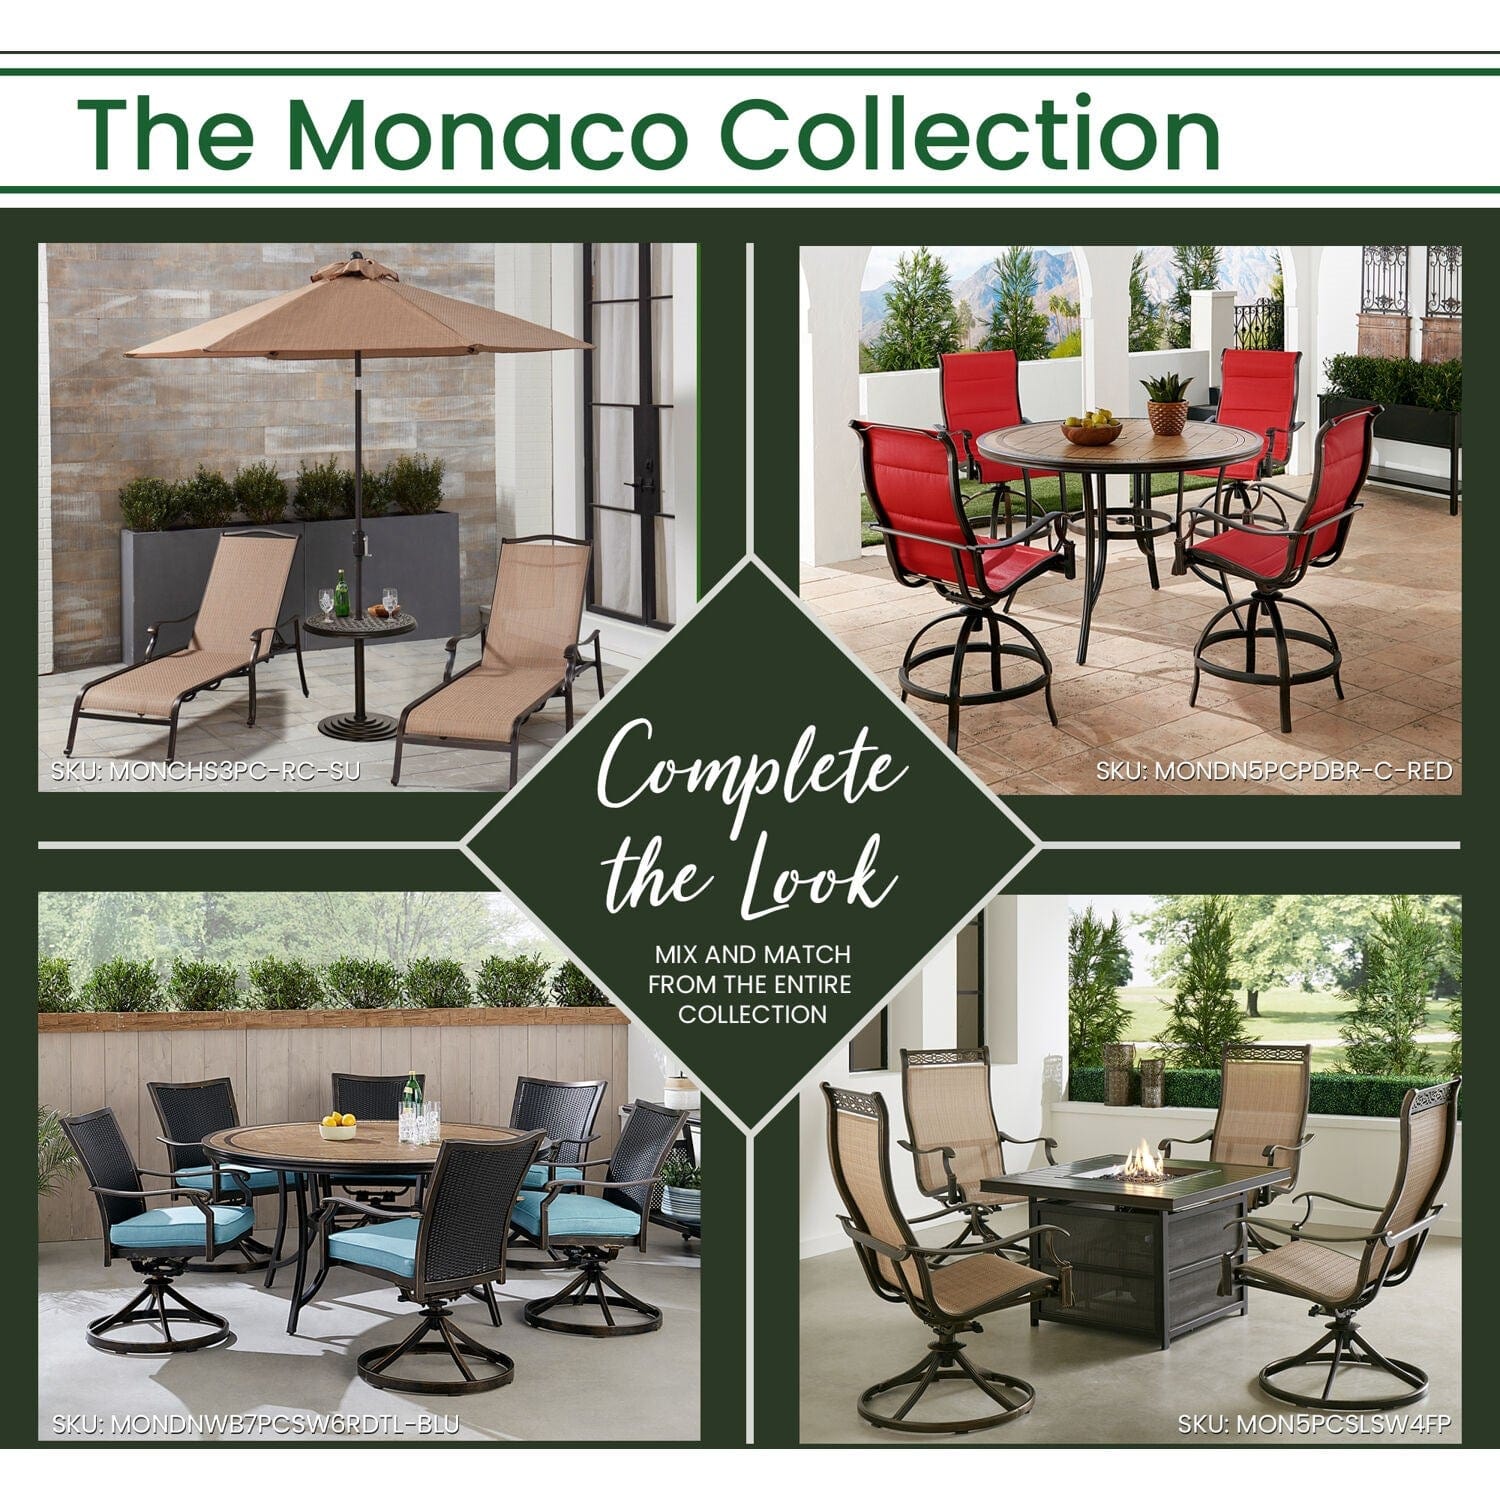 Hanover Outdoor Dining Set Hanover Monaco 6-Piece Dining Set in Tan with Four Swivel Rockers, a Cushioned Bench, and a 40" x 68" Tile-Top Table | MONDN6PCSW4BN-TAN